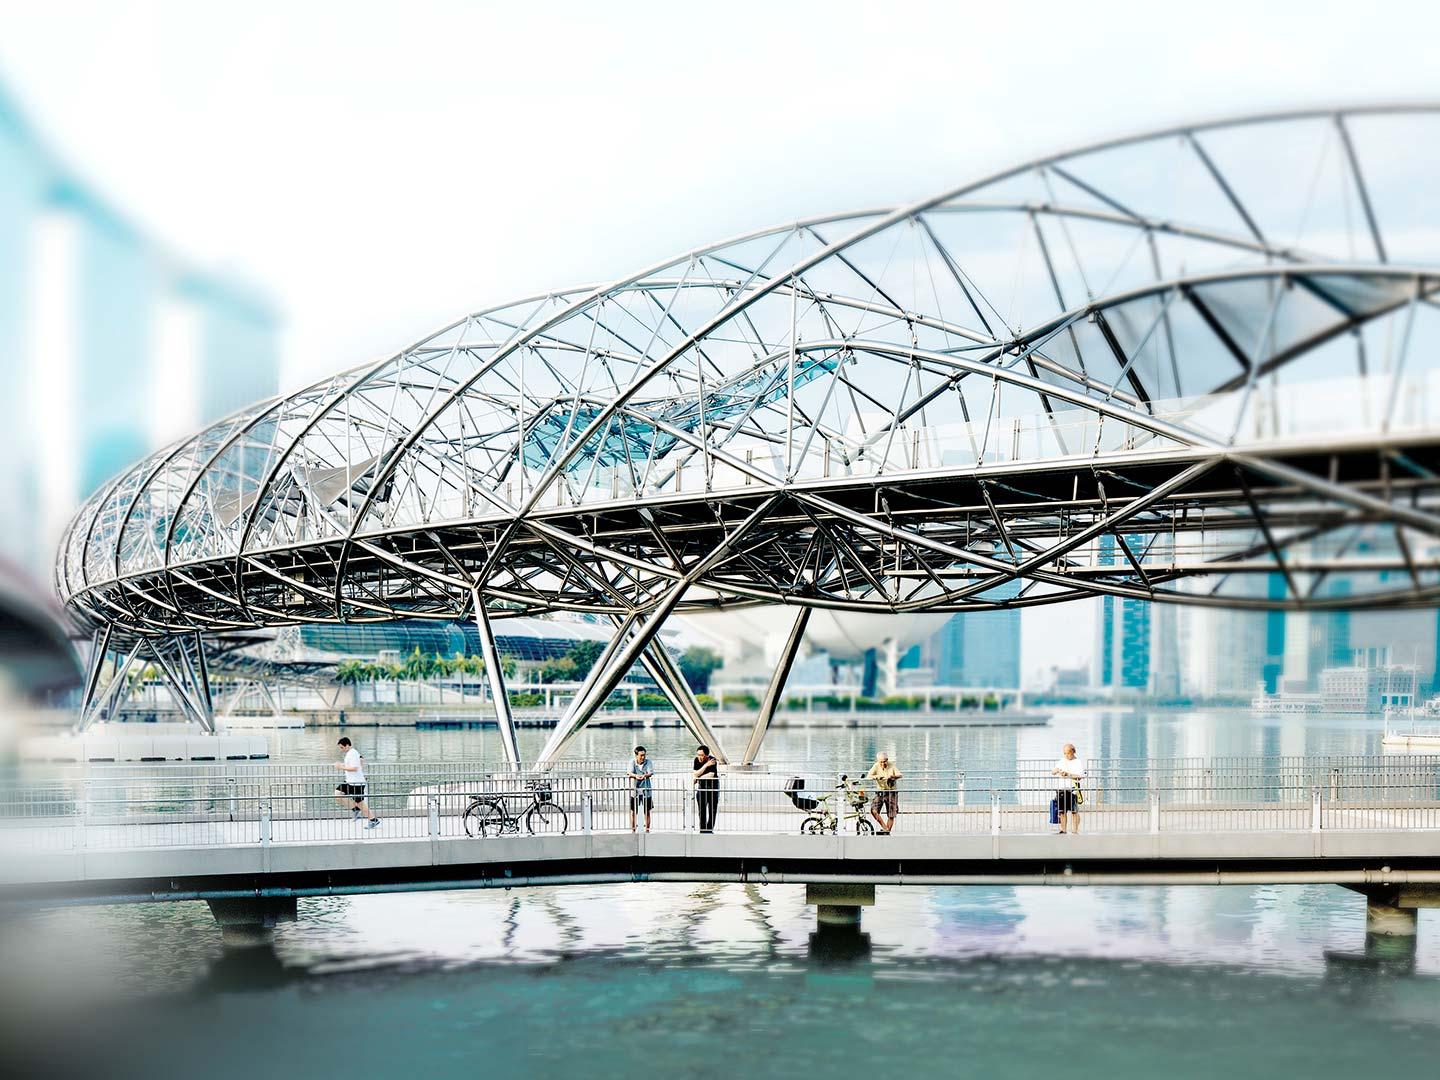 Microscopy solutions for steel - picture of the Singapore helix bridge 